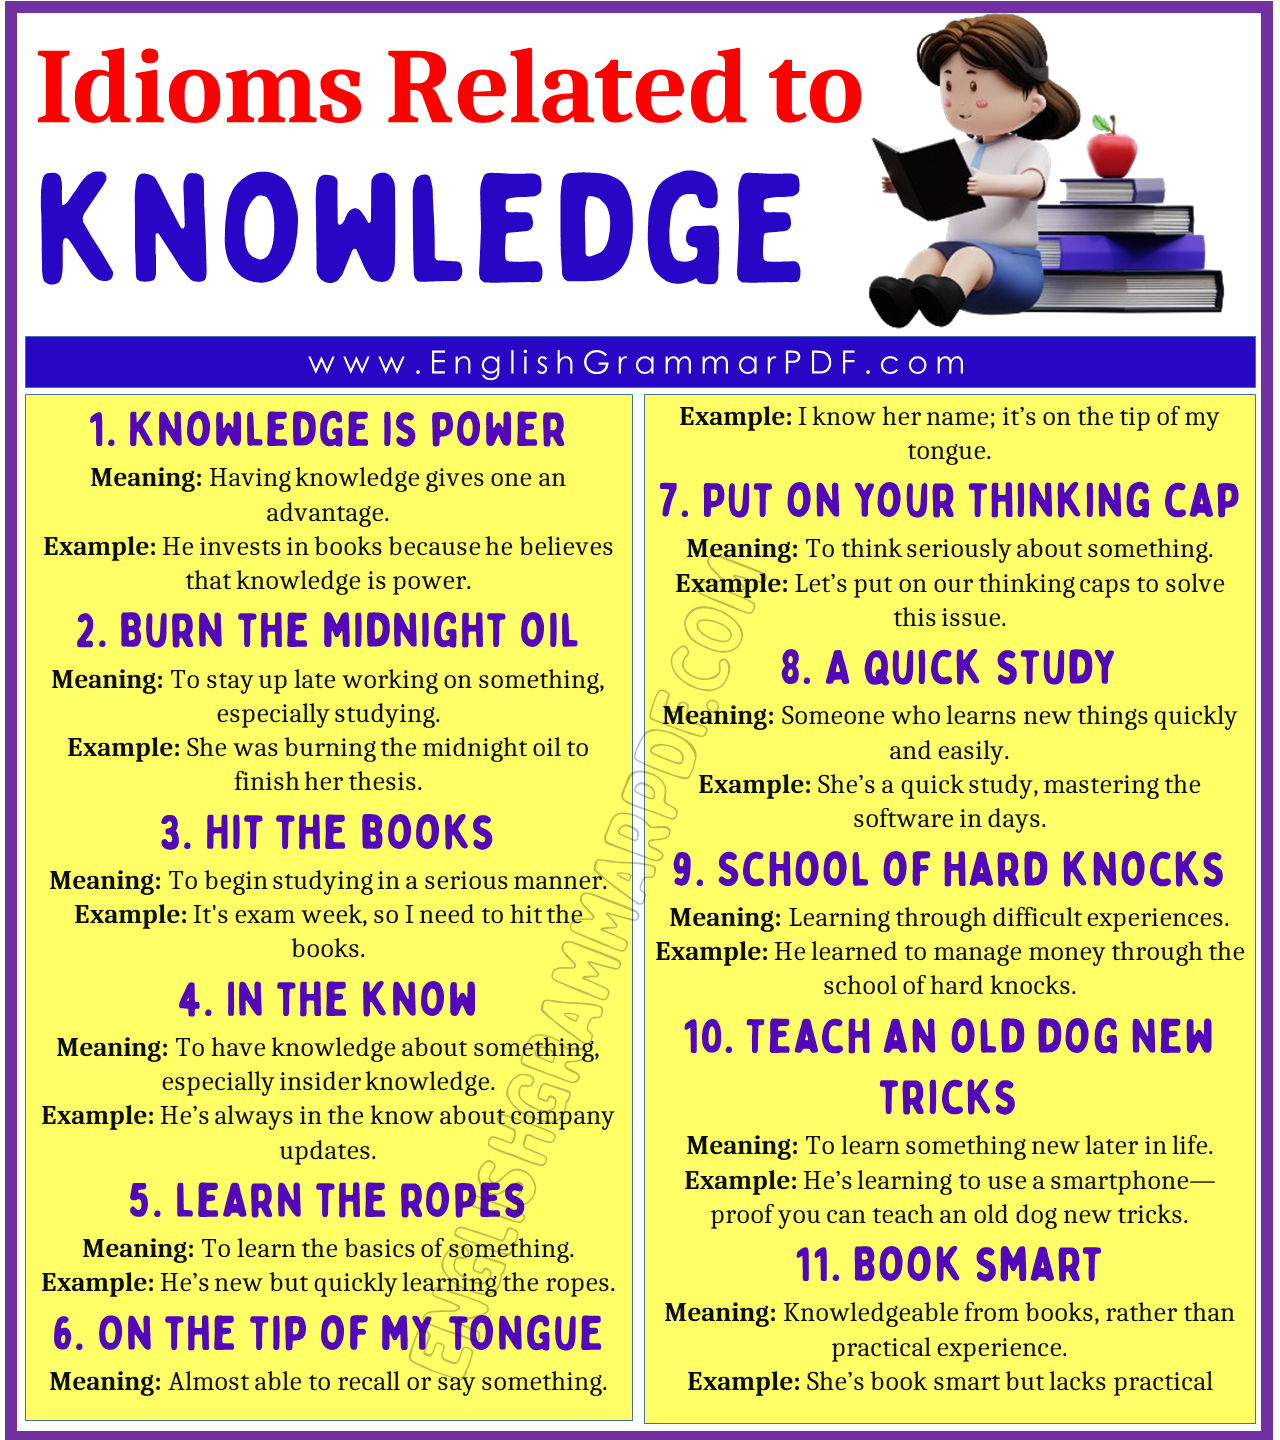 Idioms Related to Knowledge